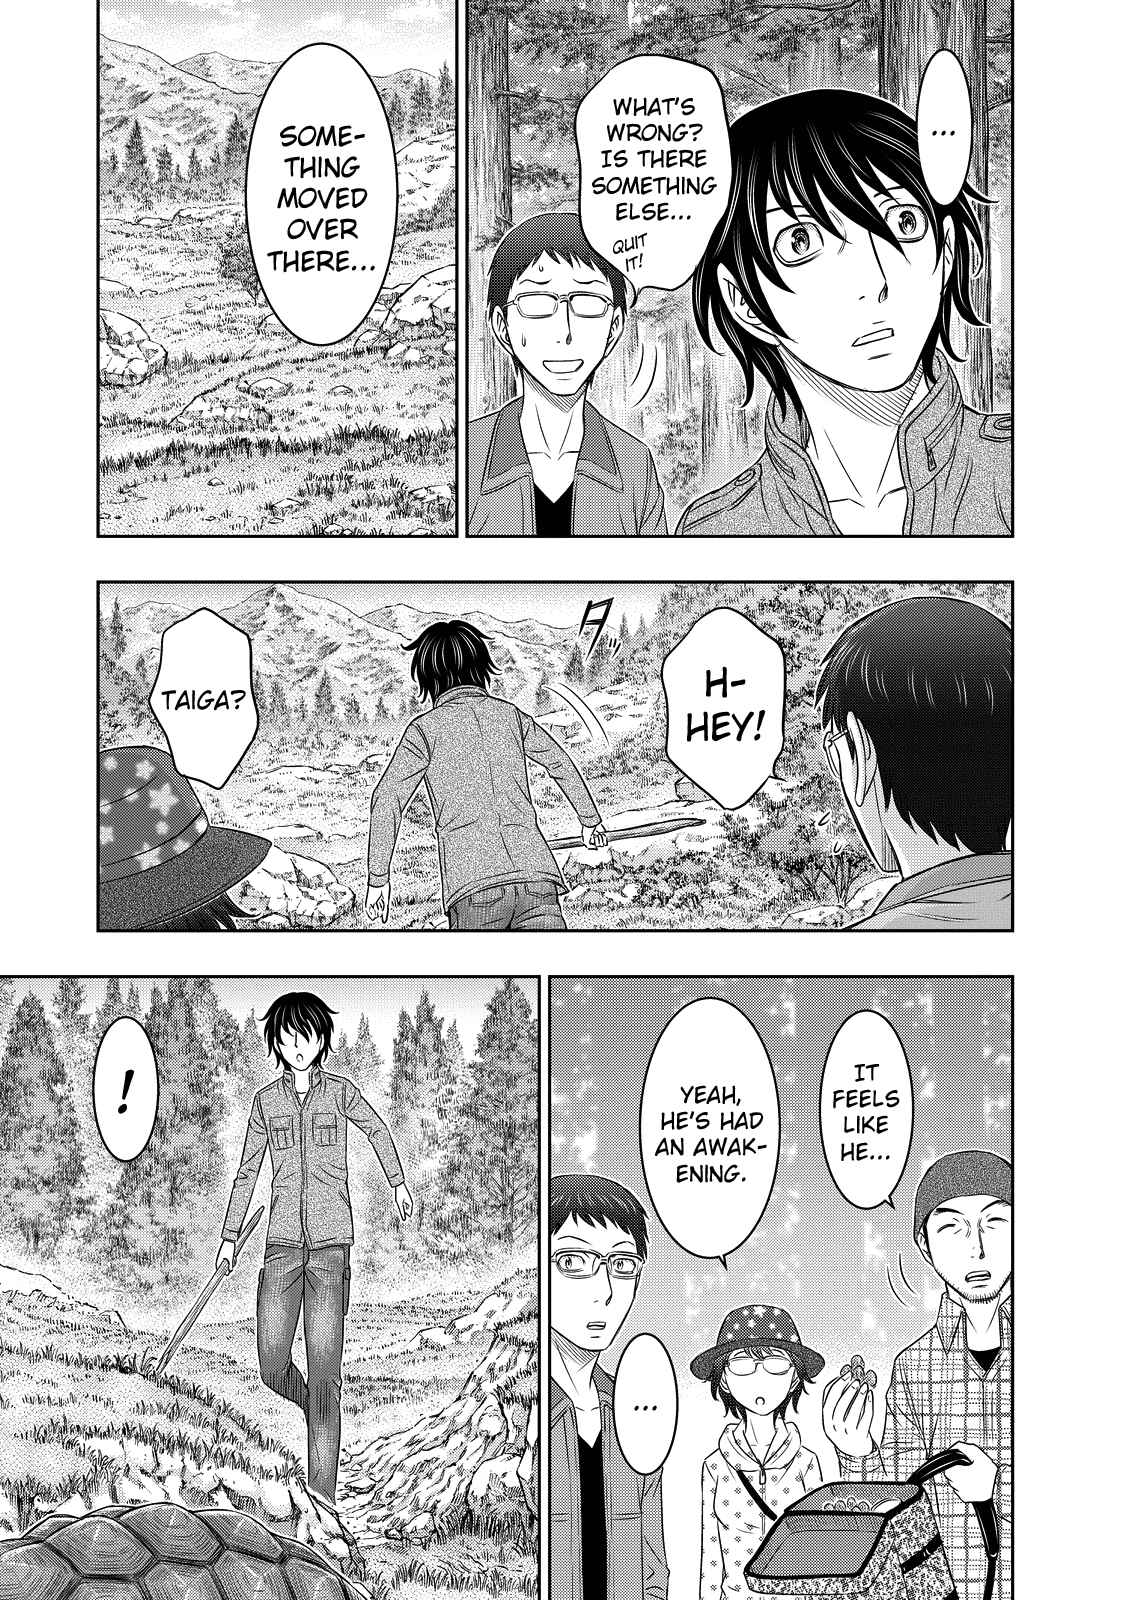 Sousei no Taiga Vol. 1 Ch. 6 Land of Survival of the Fittest